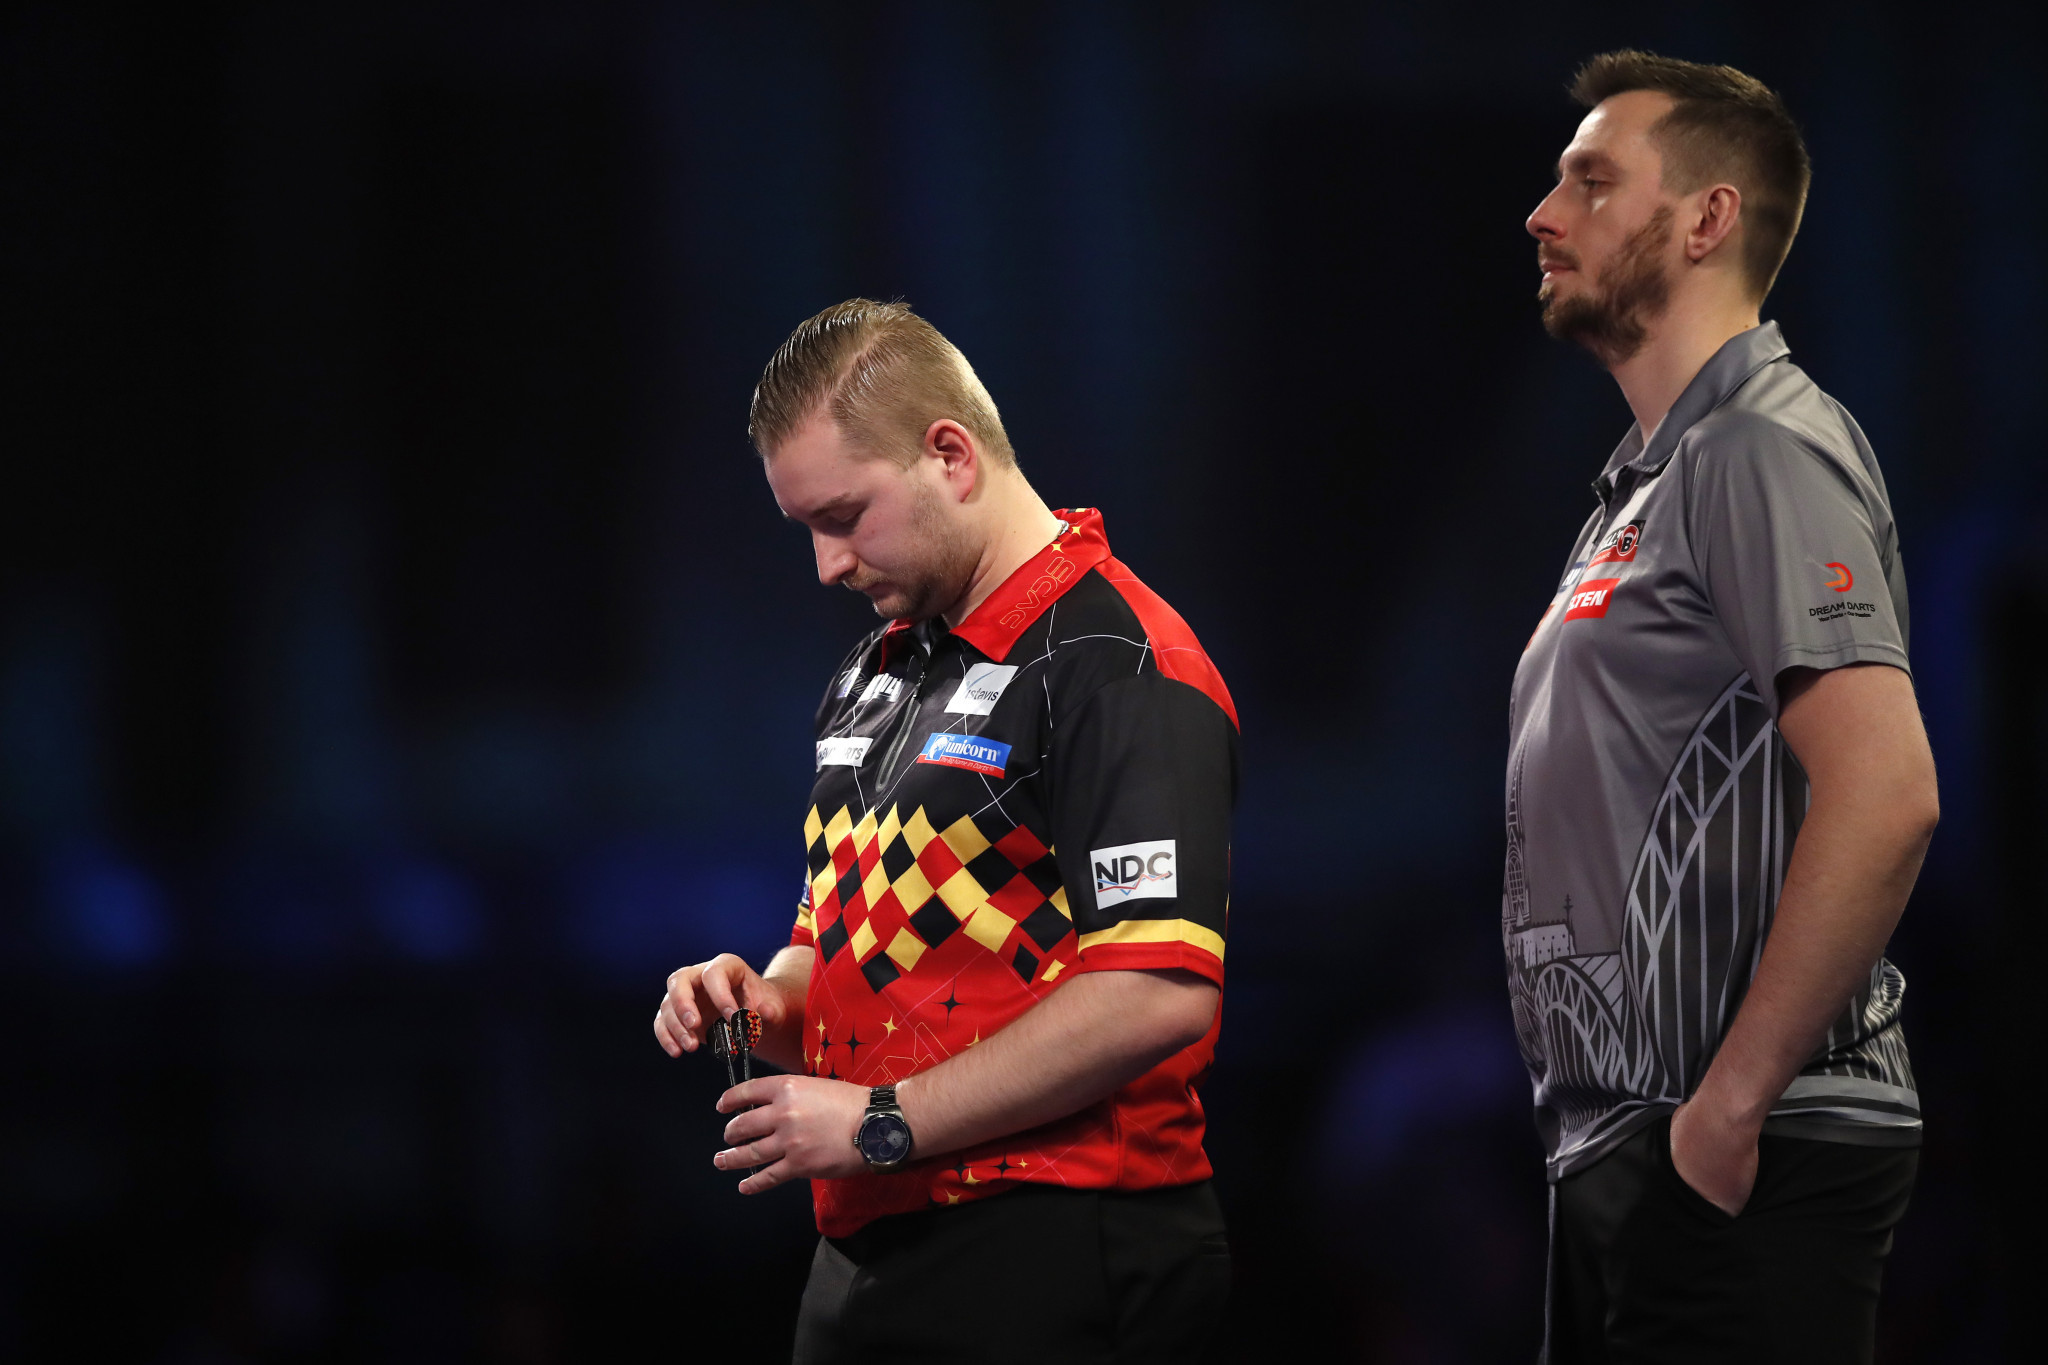 Fifth seed Van den Berg knocked out of World Darts Championship